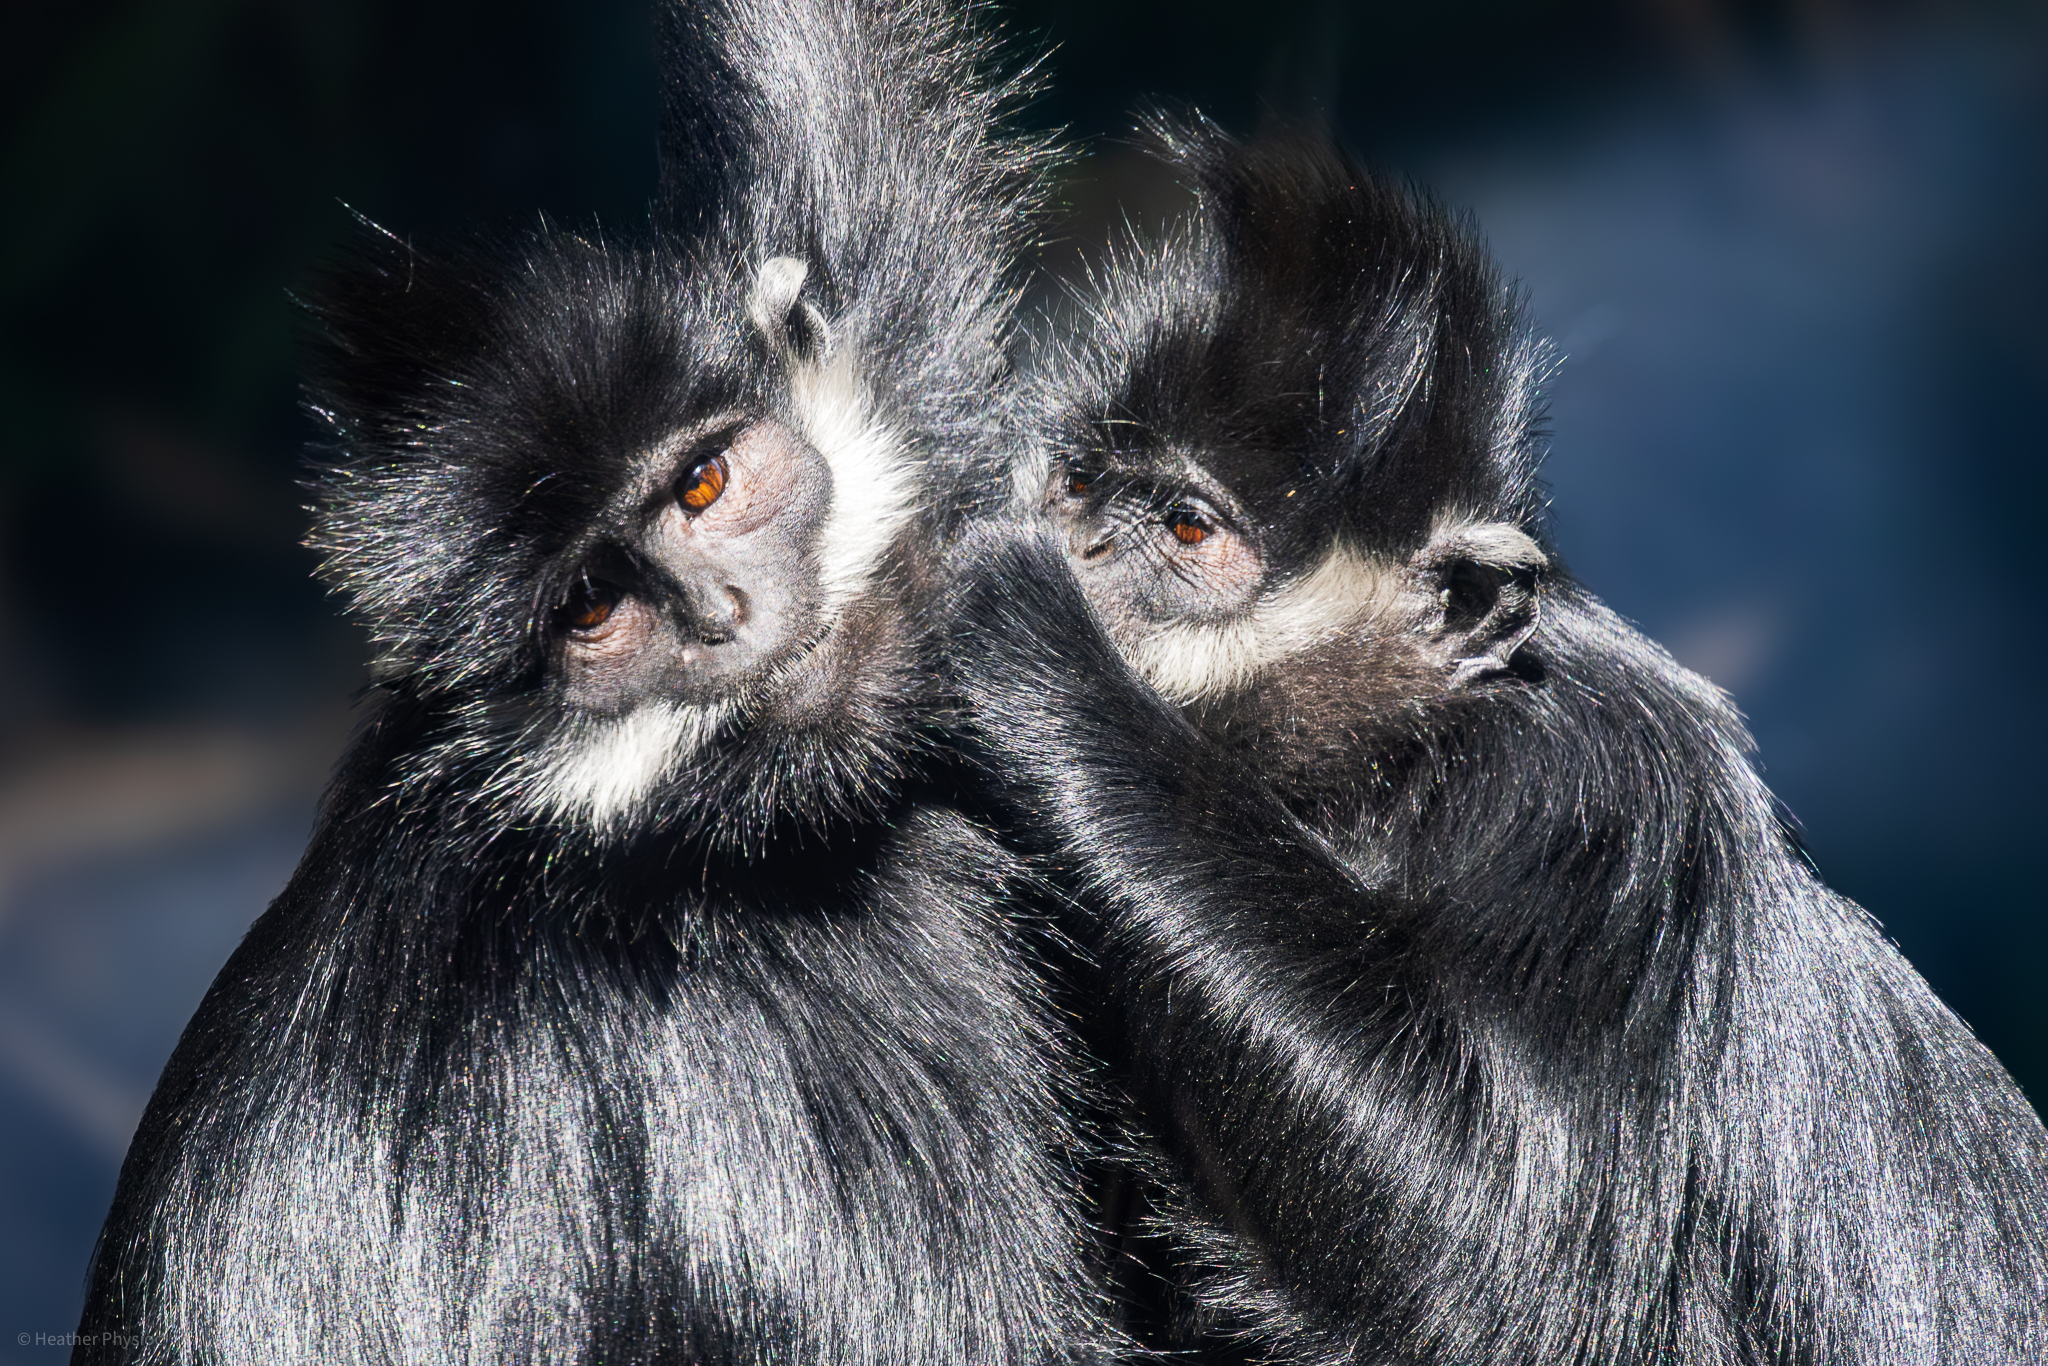 François' Langurs grooming one another at the San Diego Zoo